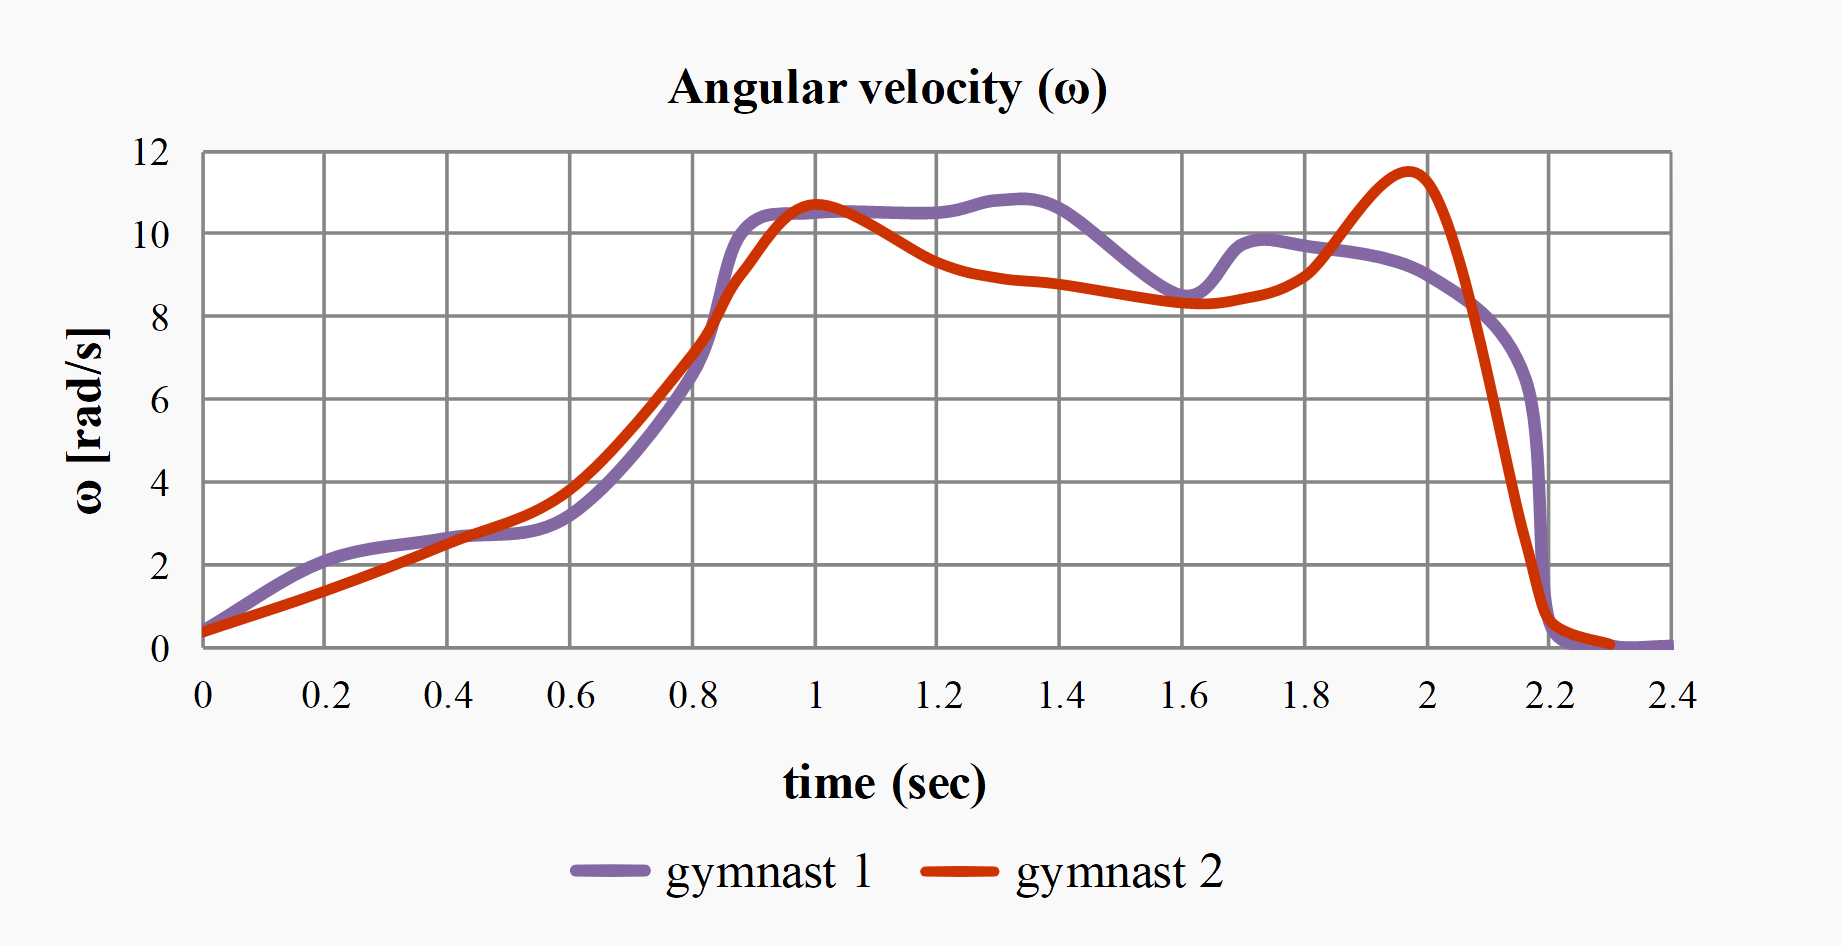 Angular velocity on the transverse axis of double back straight somersault and double back straight somersault with full twist on rings